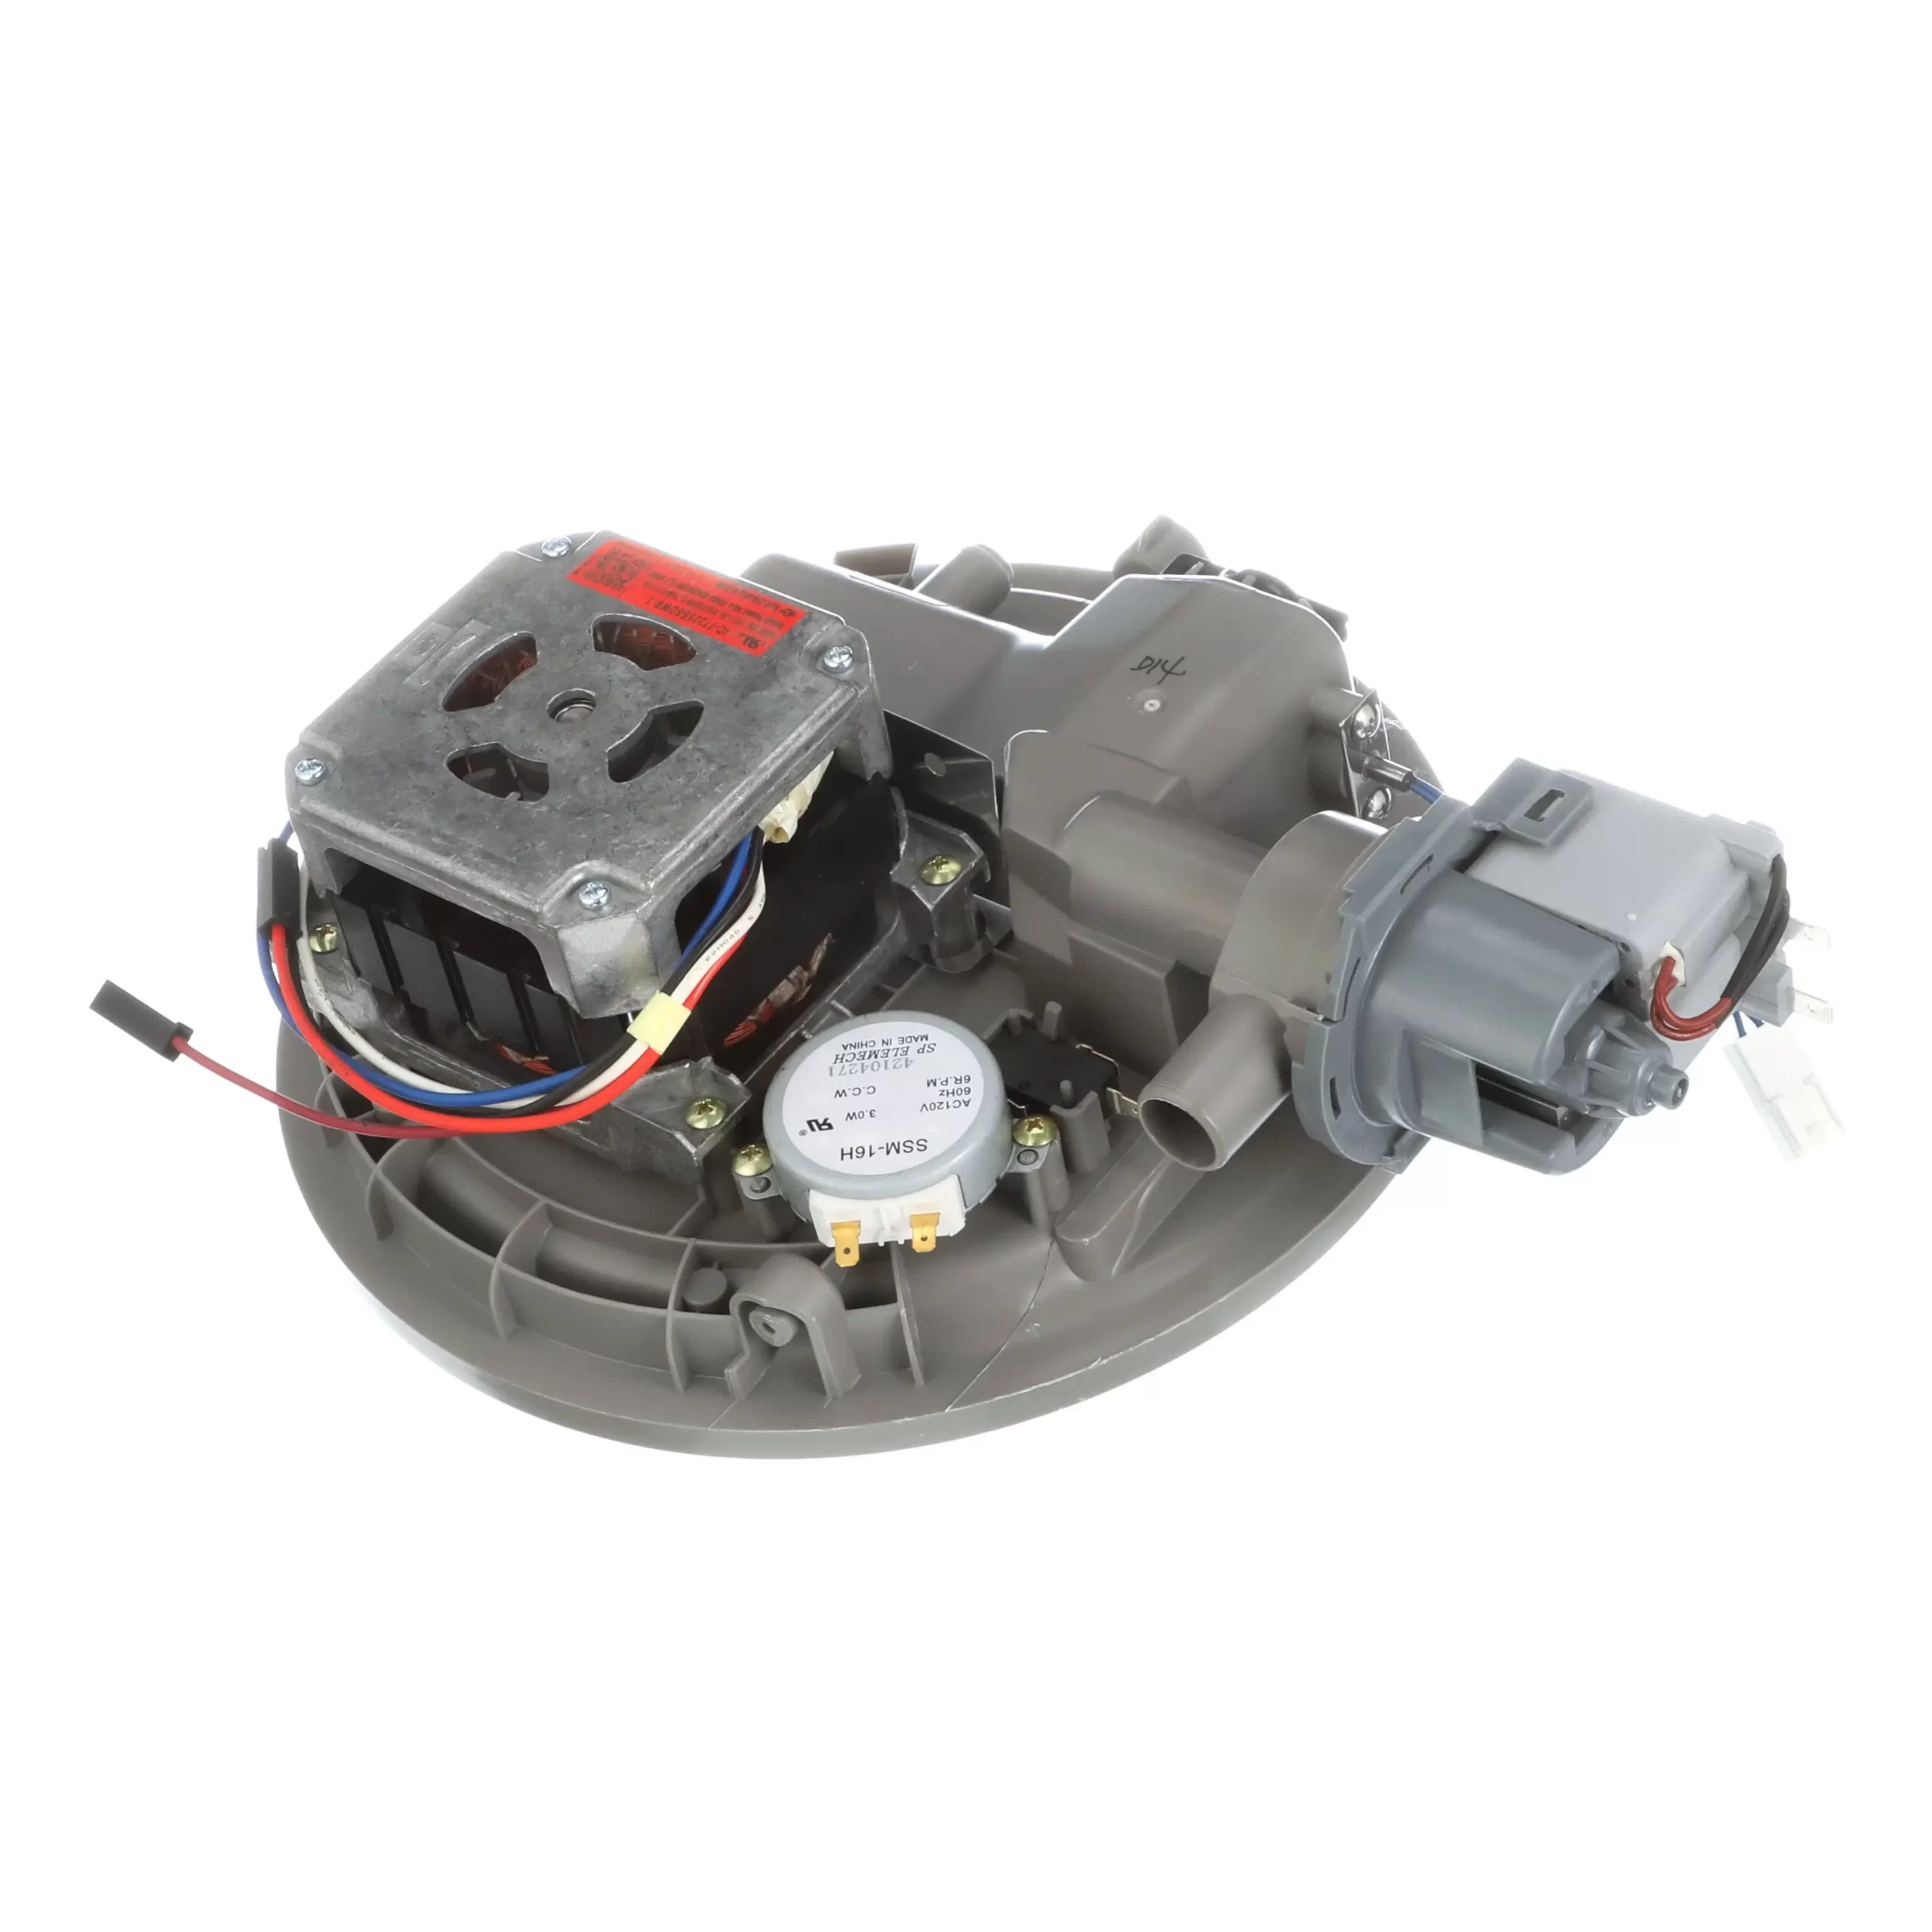 Samsung Dishwasher Motor and Sump Assembly. Part #DD82-01353A